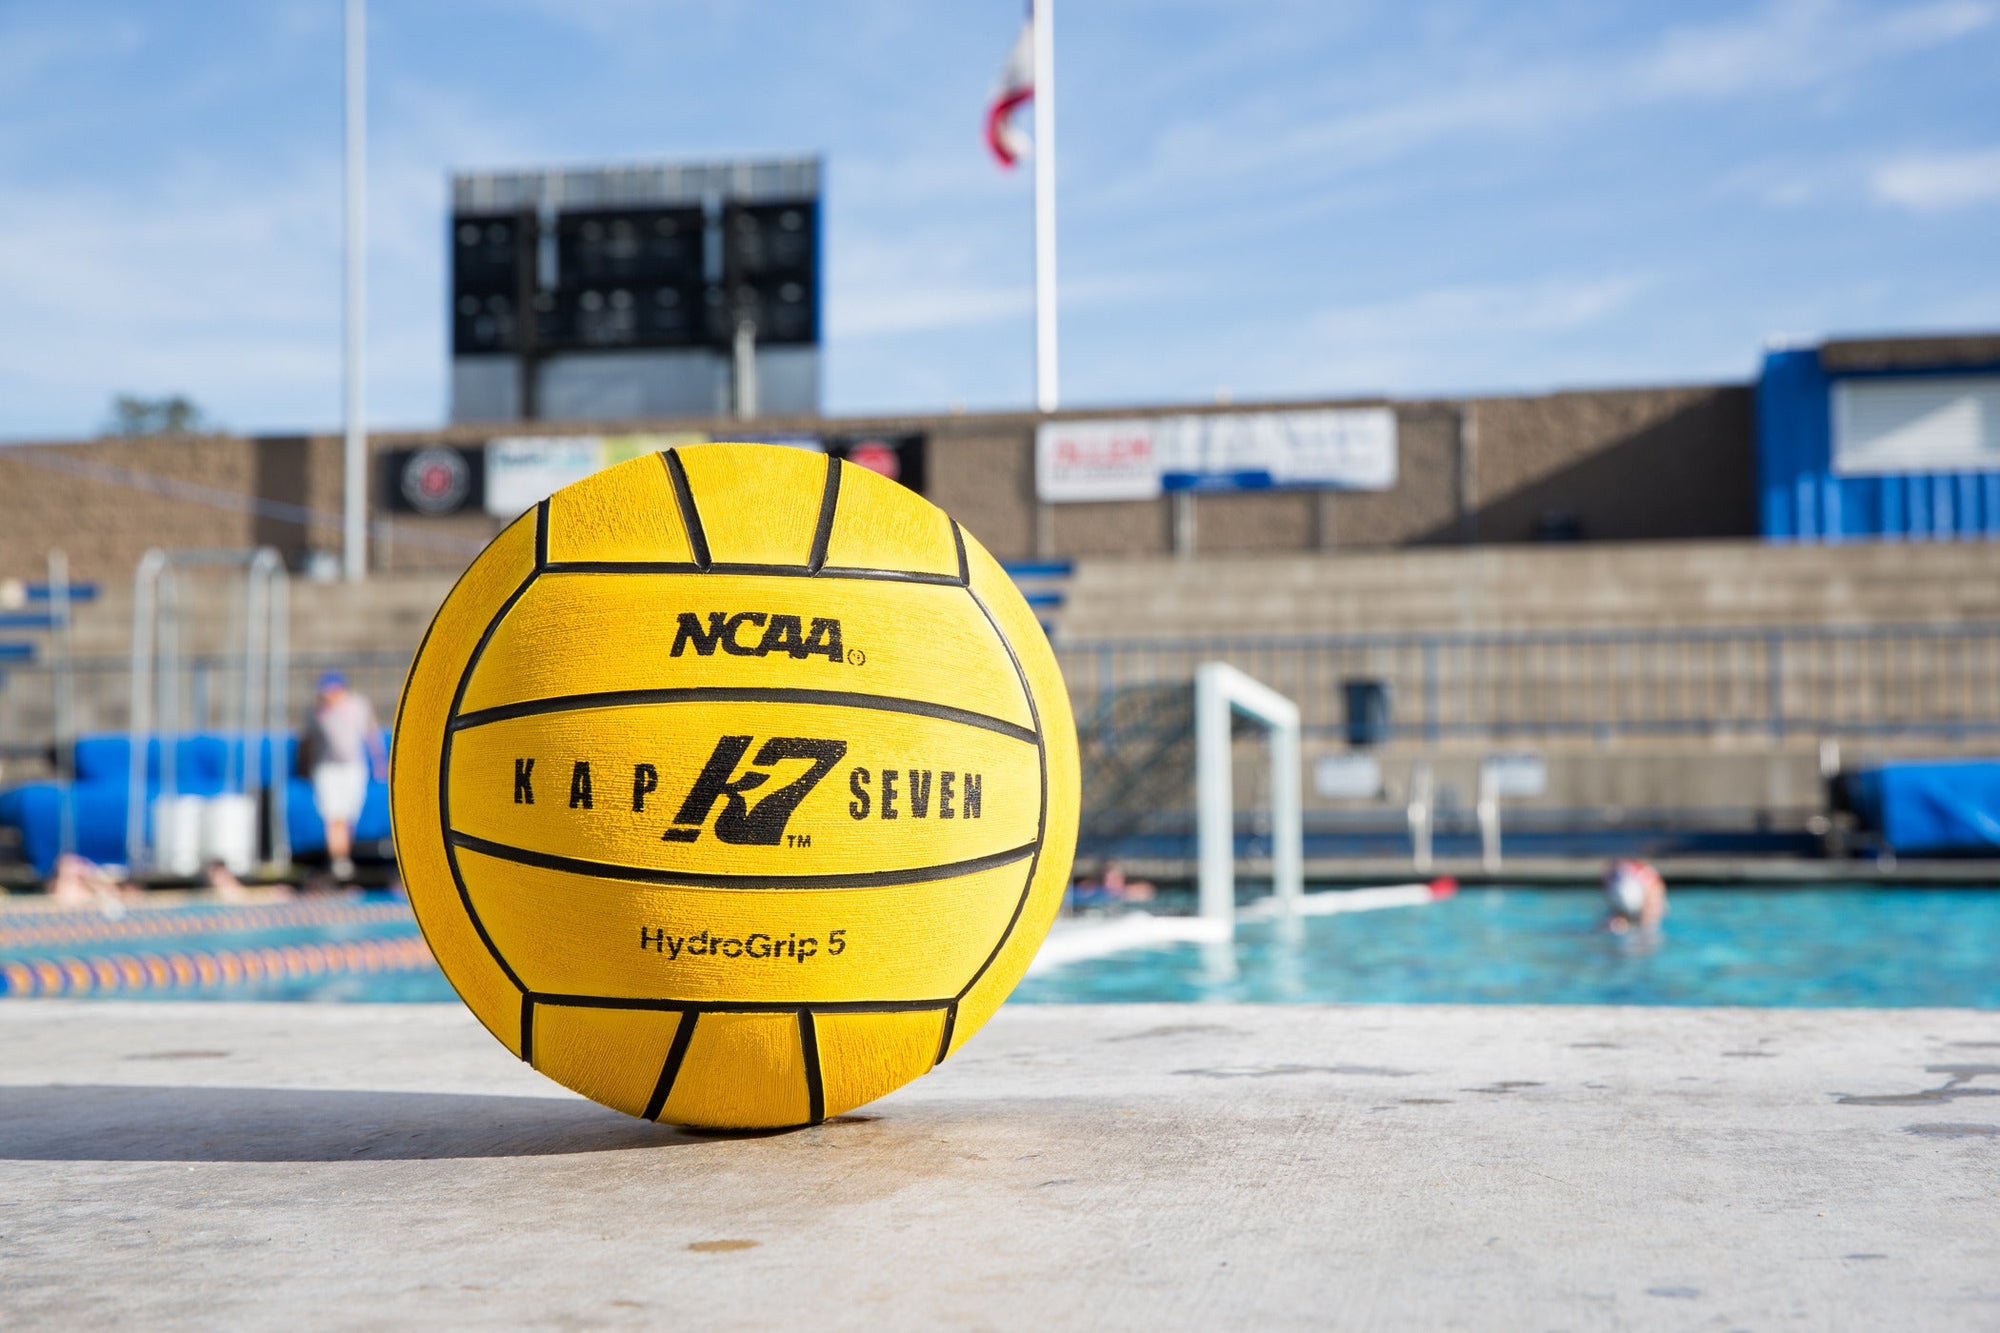 How long should a water polo ball last?